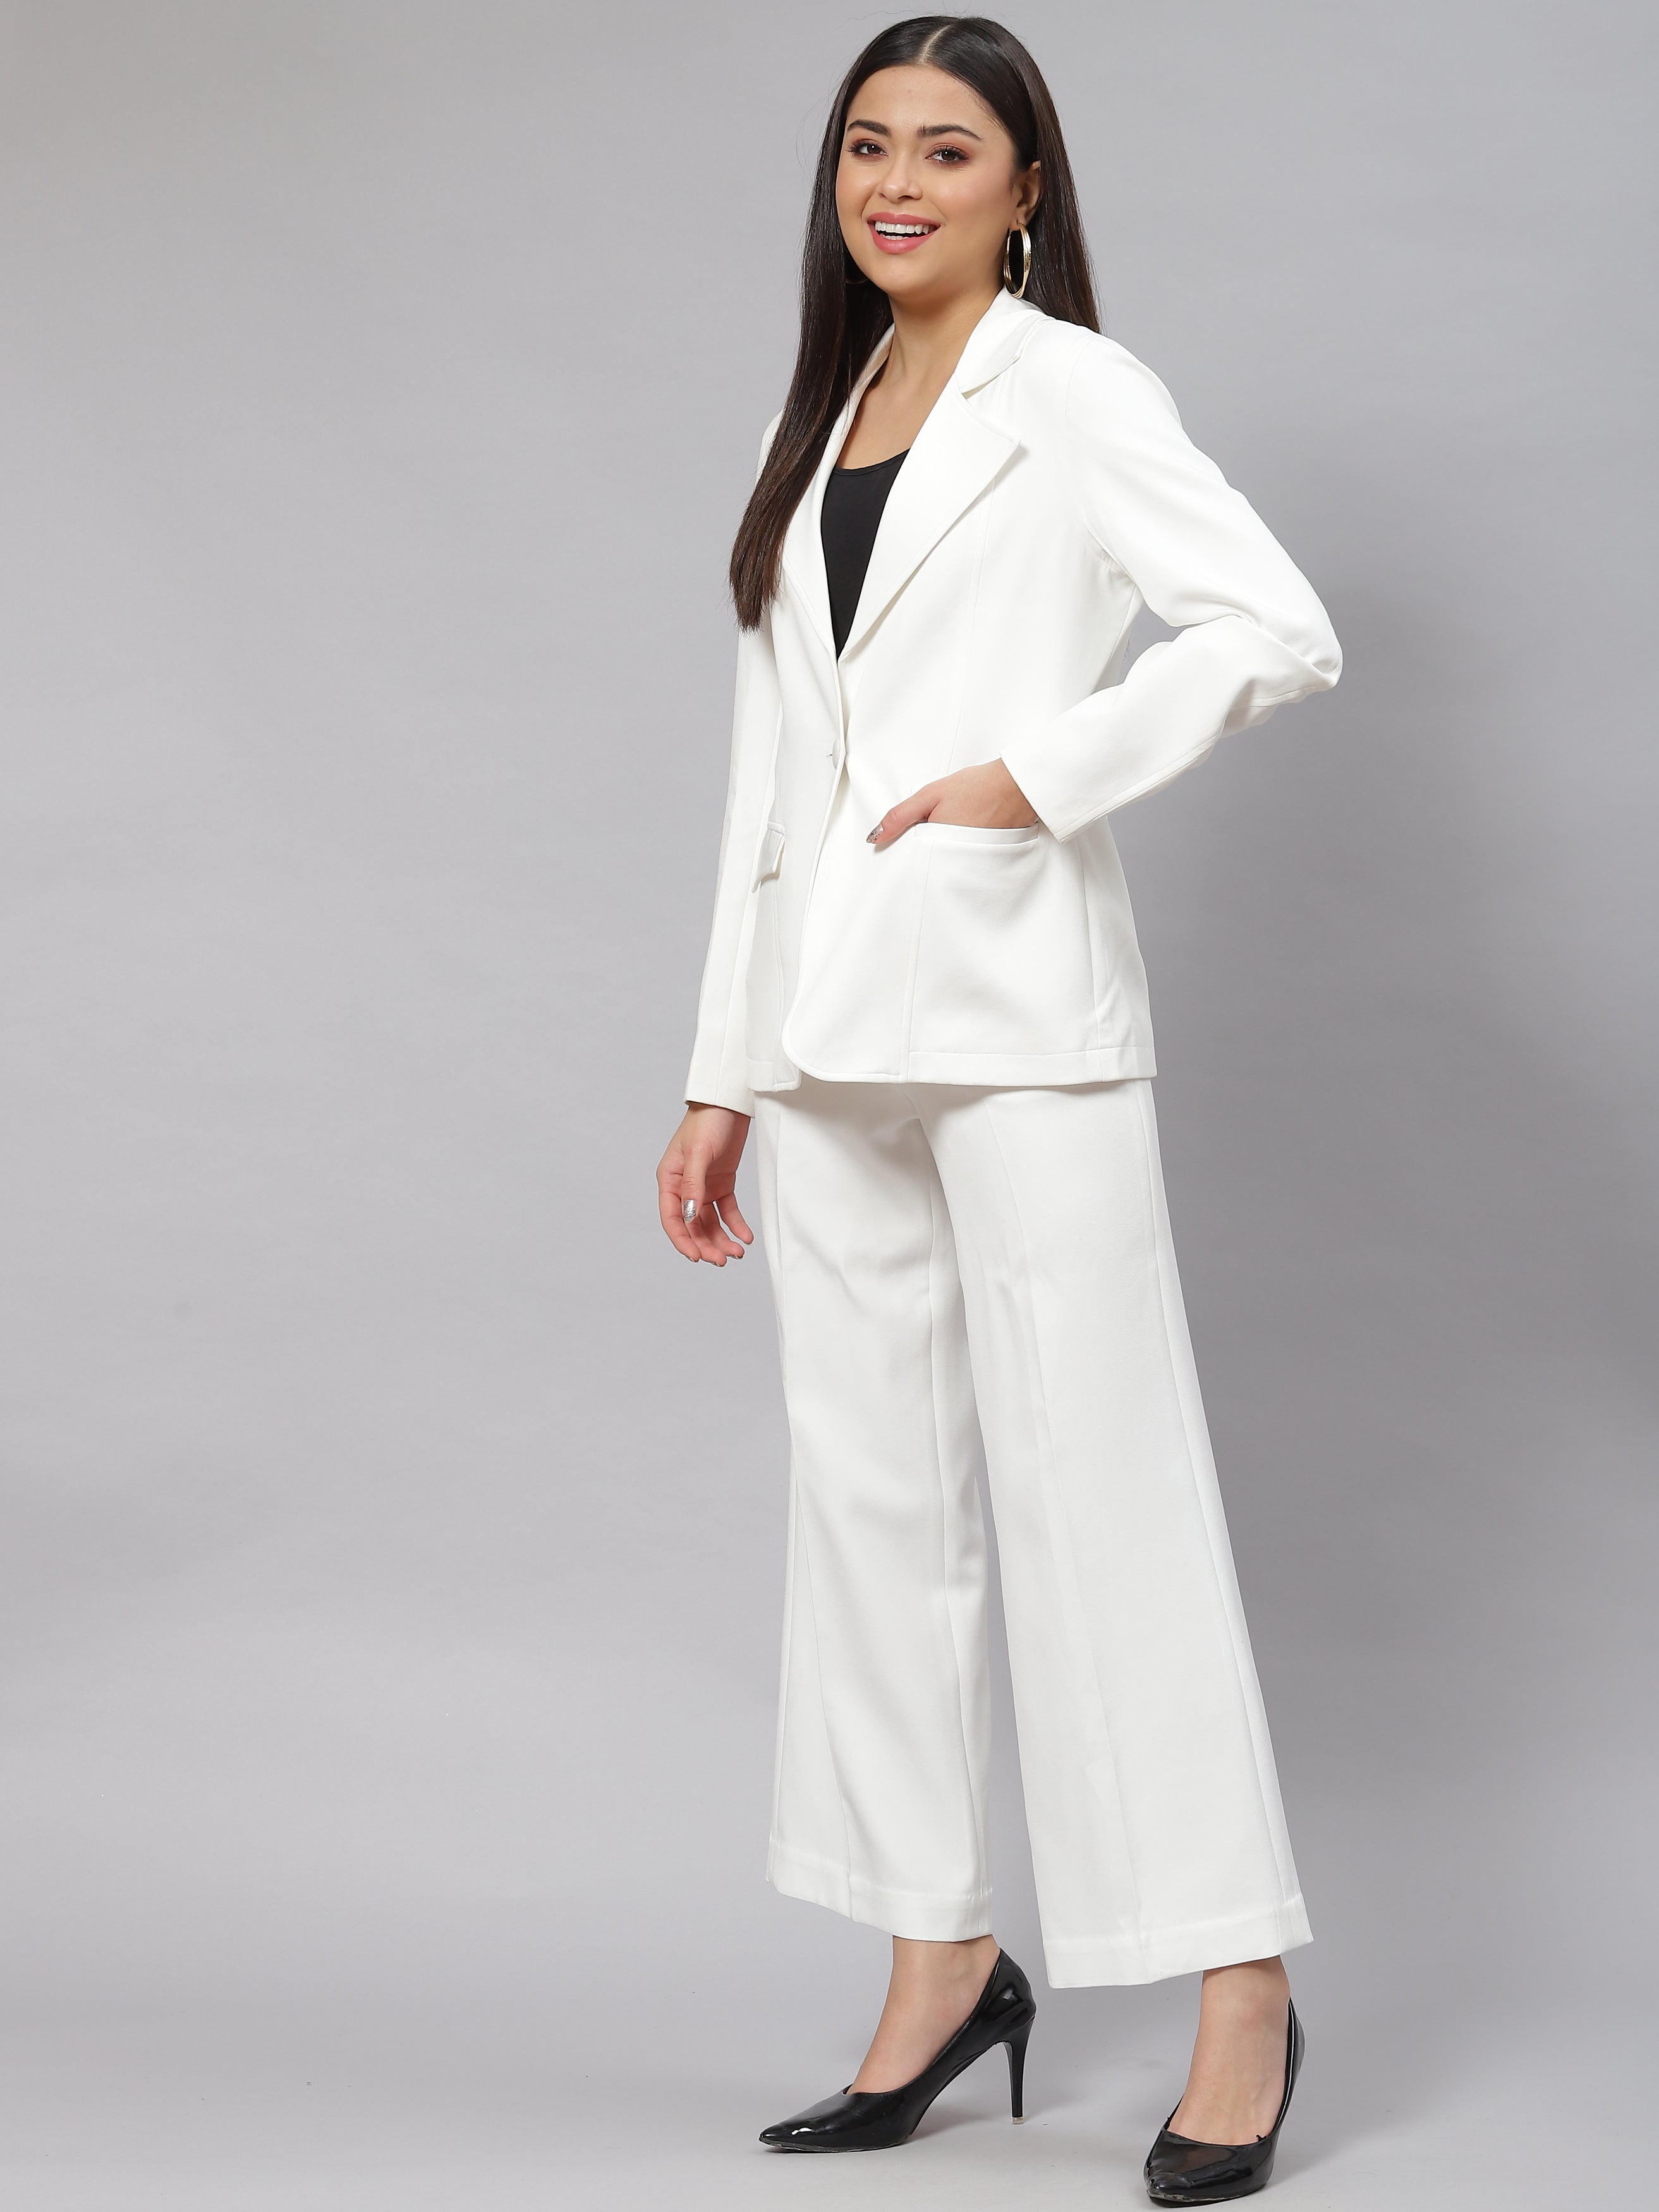 Women suit with trousers by amanboatfashion - Women's Suits - Afrikrea